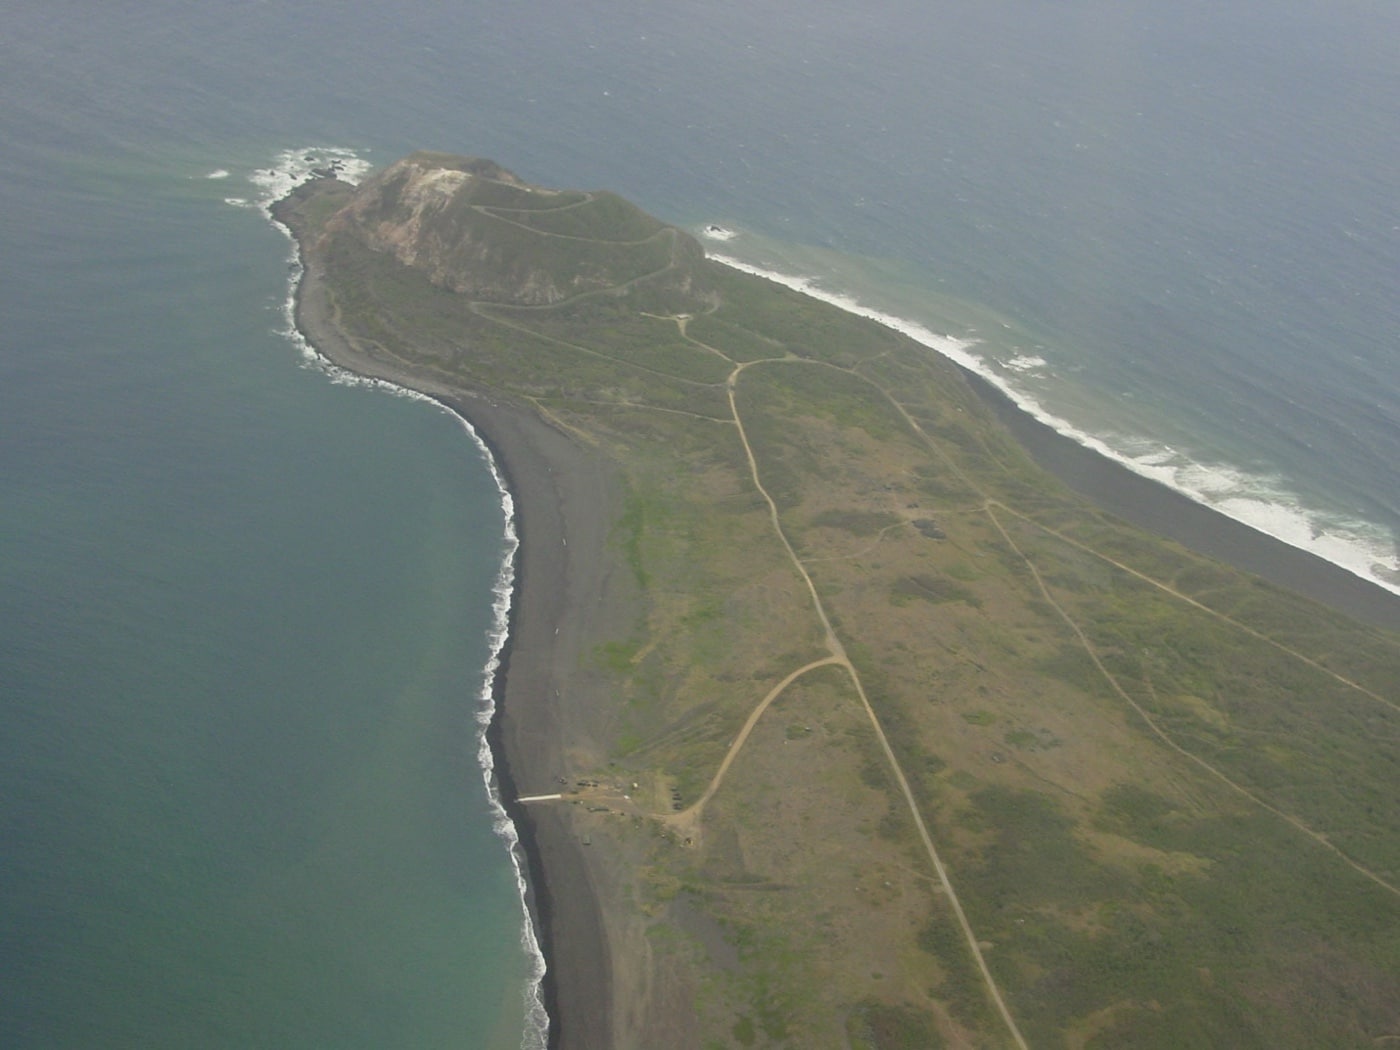 In this overhead photo of the island, we see Mount Suribachi at the south end. After Iwo Jima had been captured, the Marine Corps history division documented the anniversary of the battle with the Navy and Marine Corps. Iwo Jima's strategic importance has been questioned in recent years, but at the beginning of the battle, planting a flag on Iwo Jima seemed to be necessary.